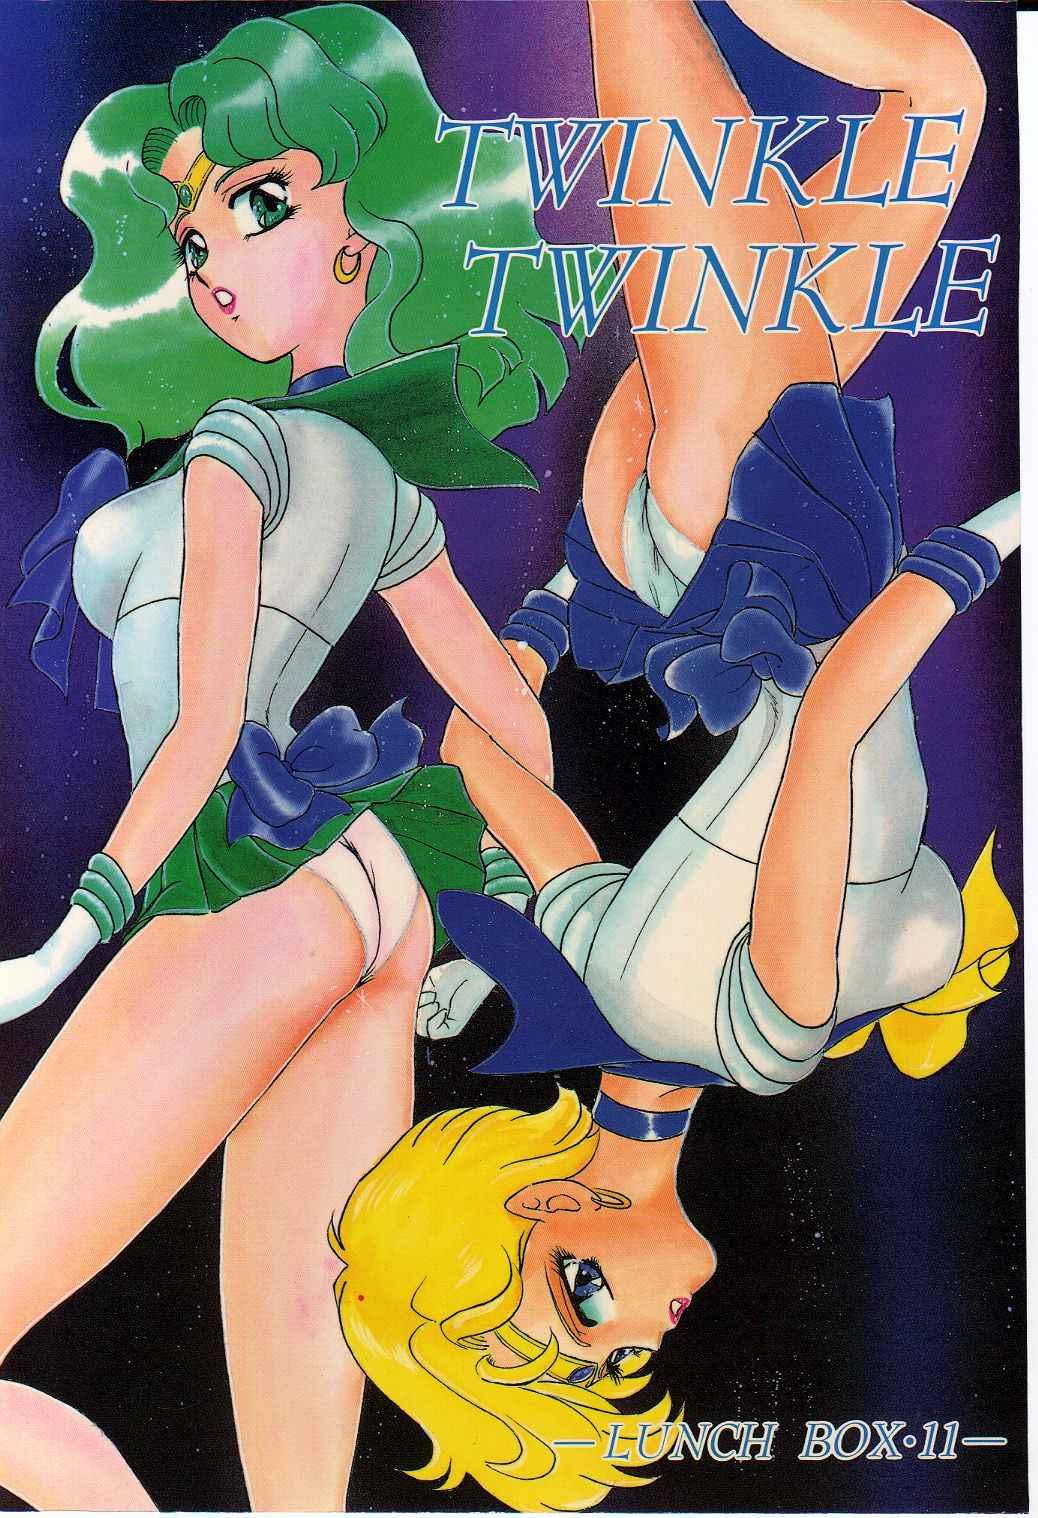 Gay Gloryhole Lunch Box 11 - Twinkle Twinkle - Sailor moon Celebrities - Page 1